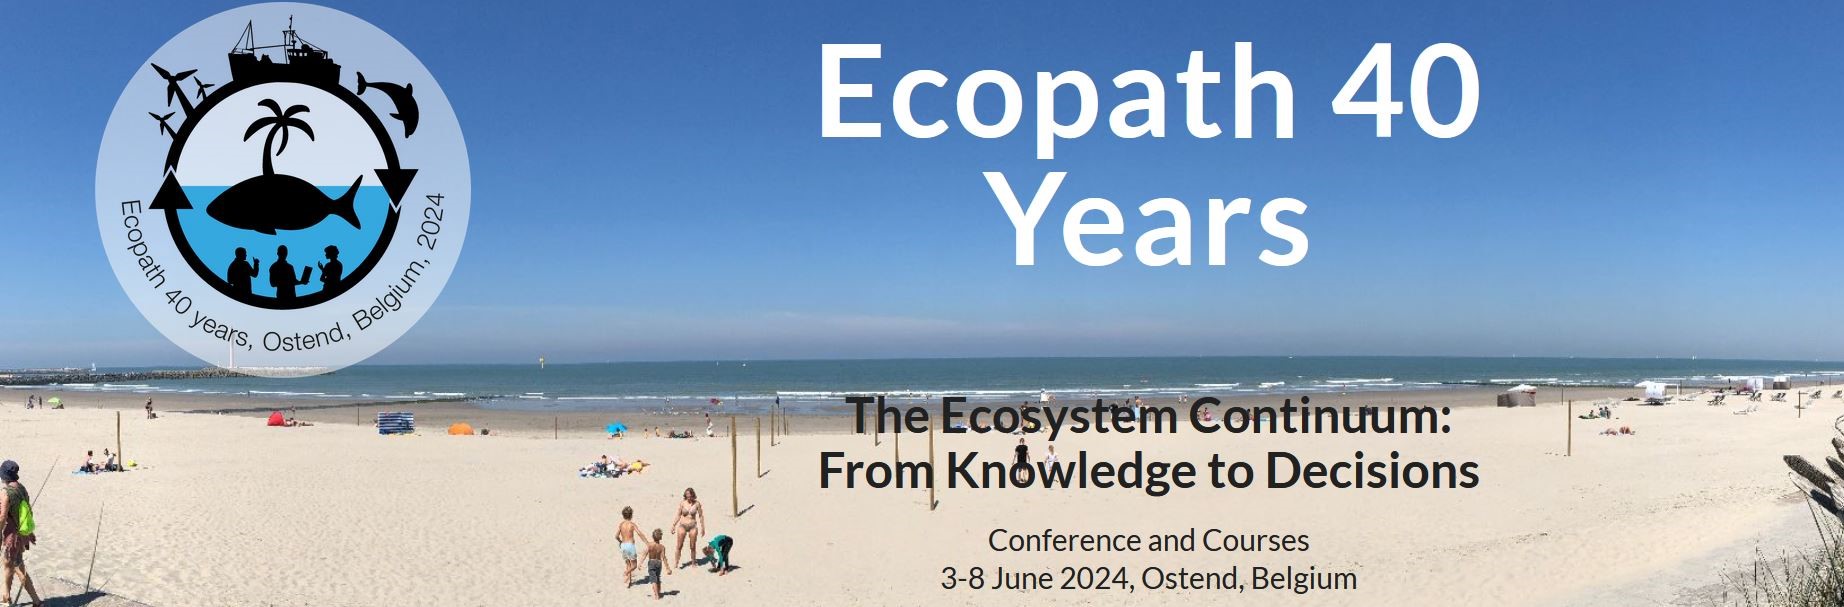 ECOPATH 40 years conference